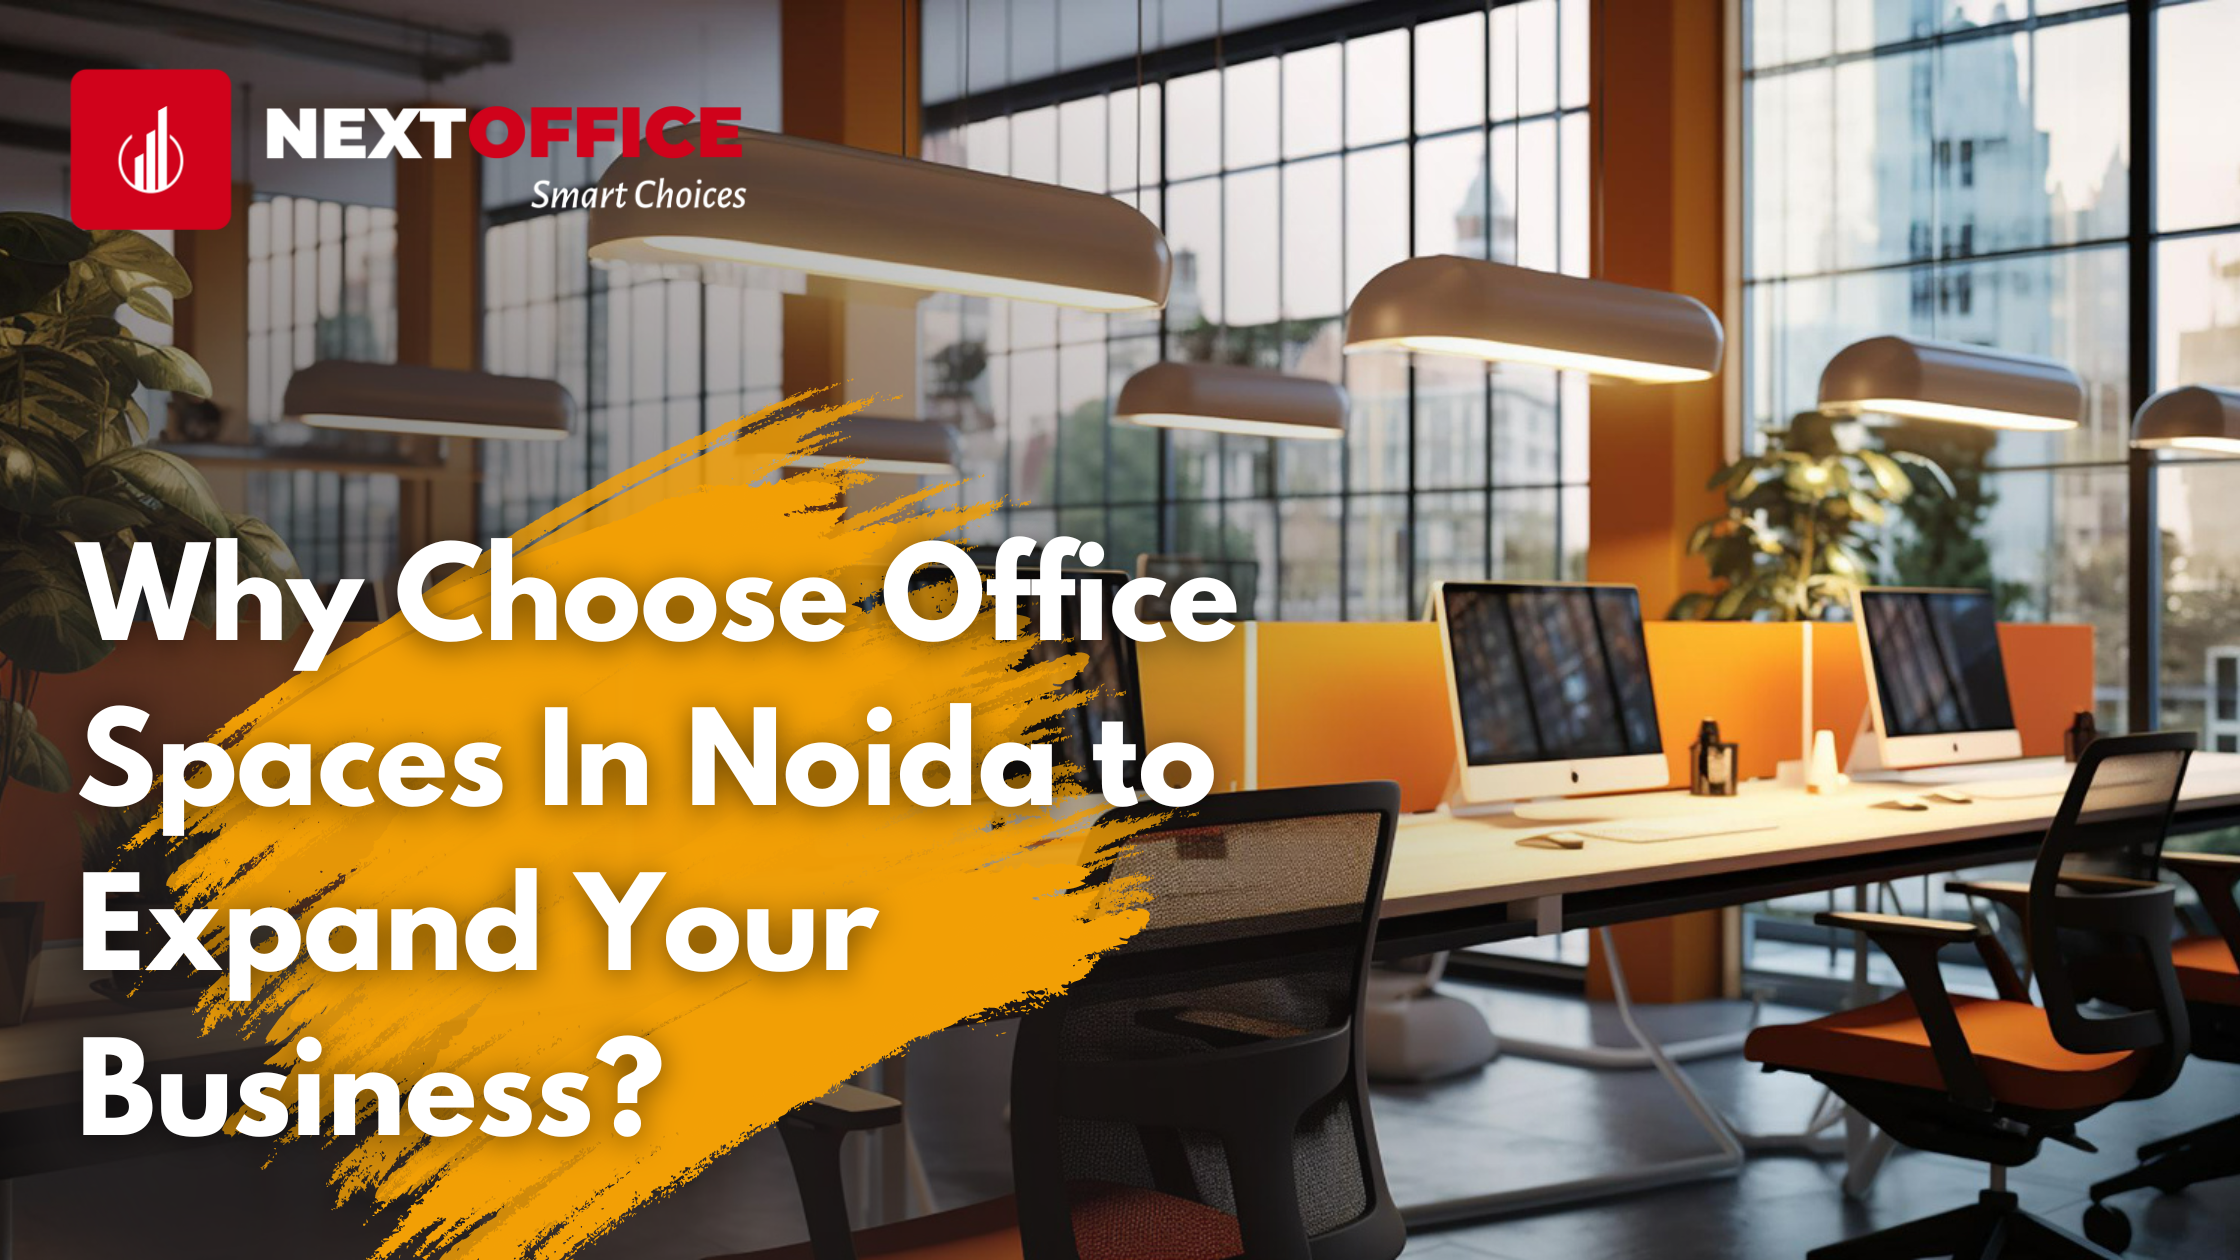 Why Choose Office Spaces In Noida to Expand Your Business?